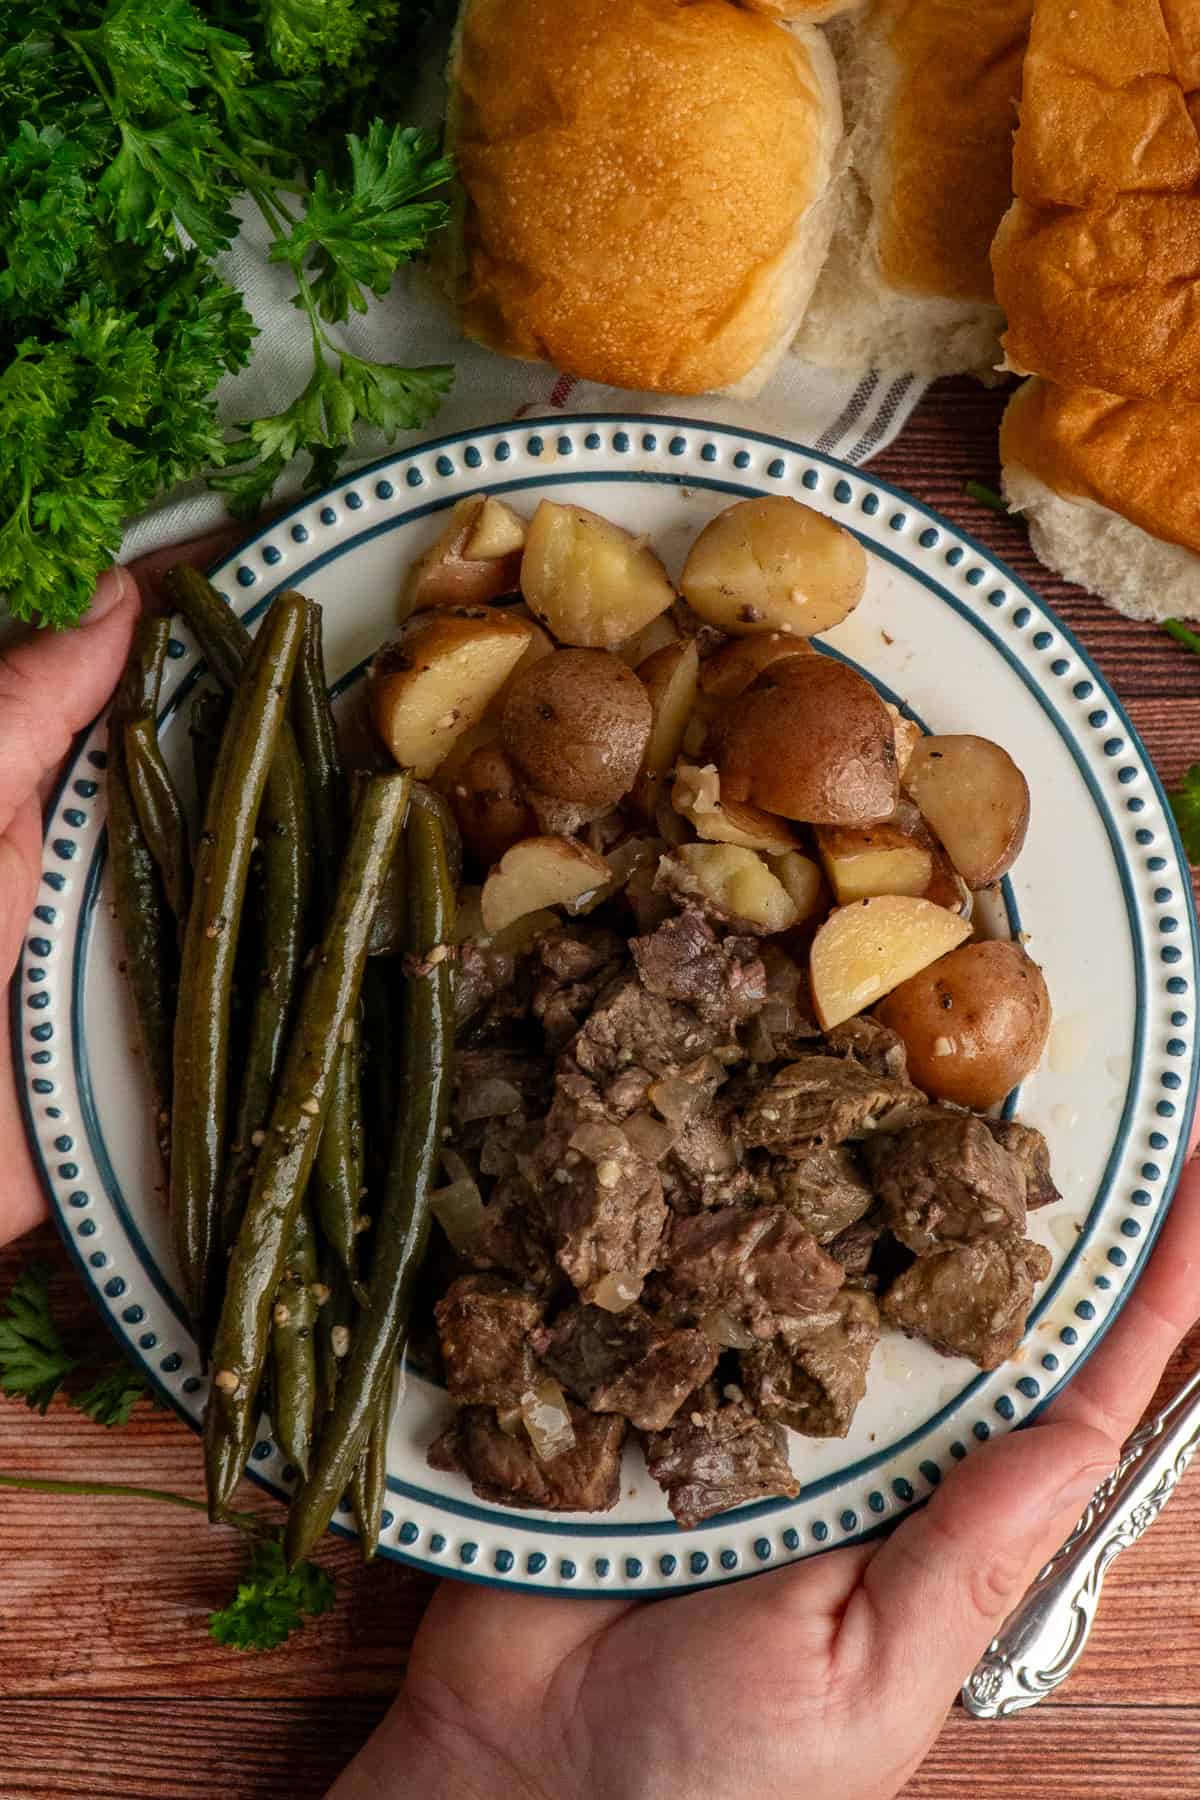 Hands holding a plate of crock pot steak and potatoes.